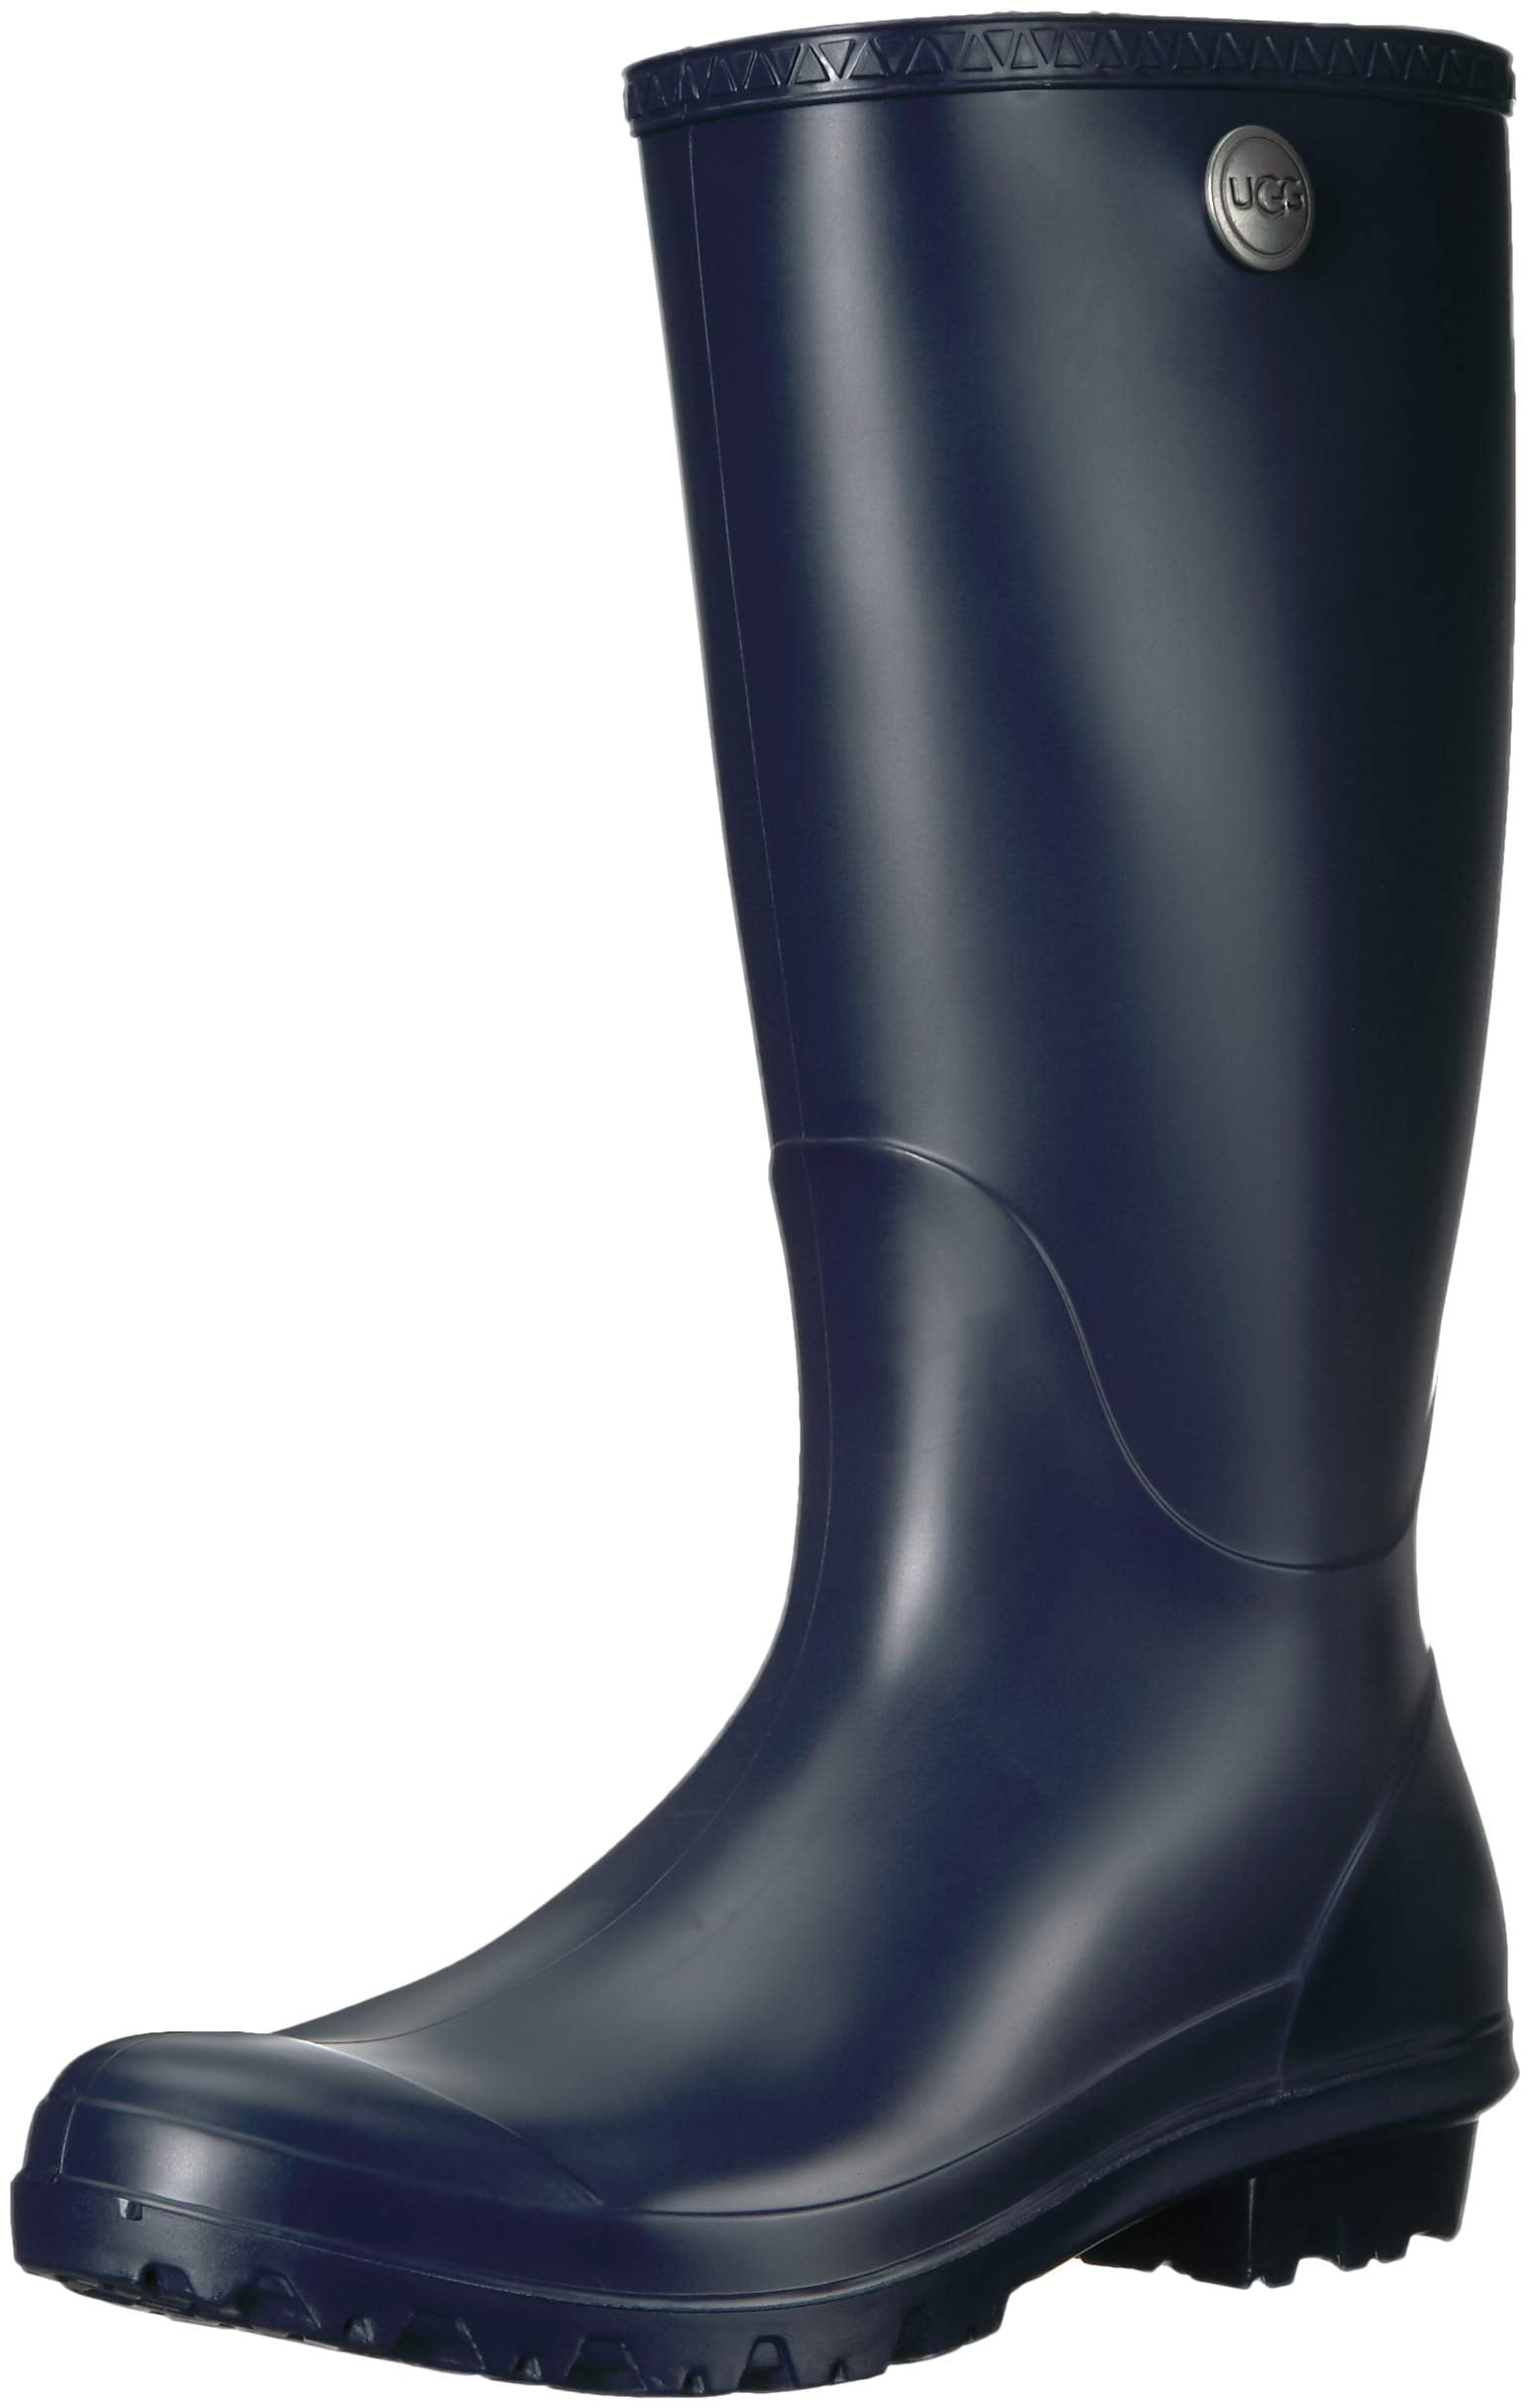 ugg shelby rain boot review